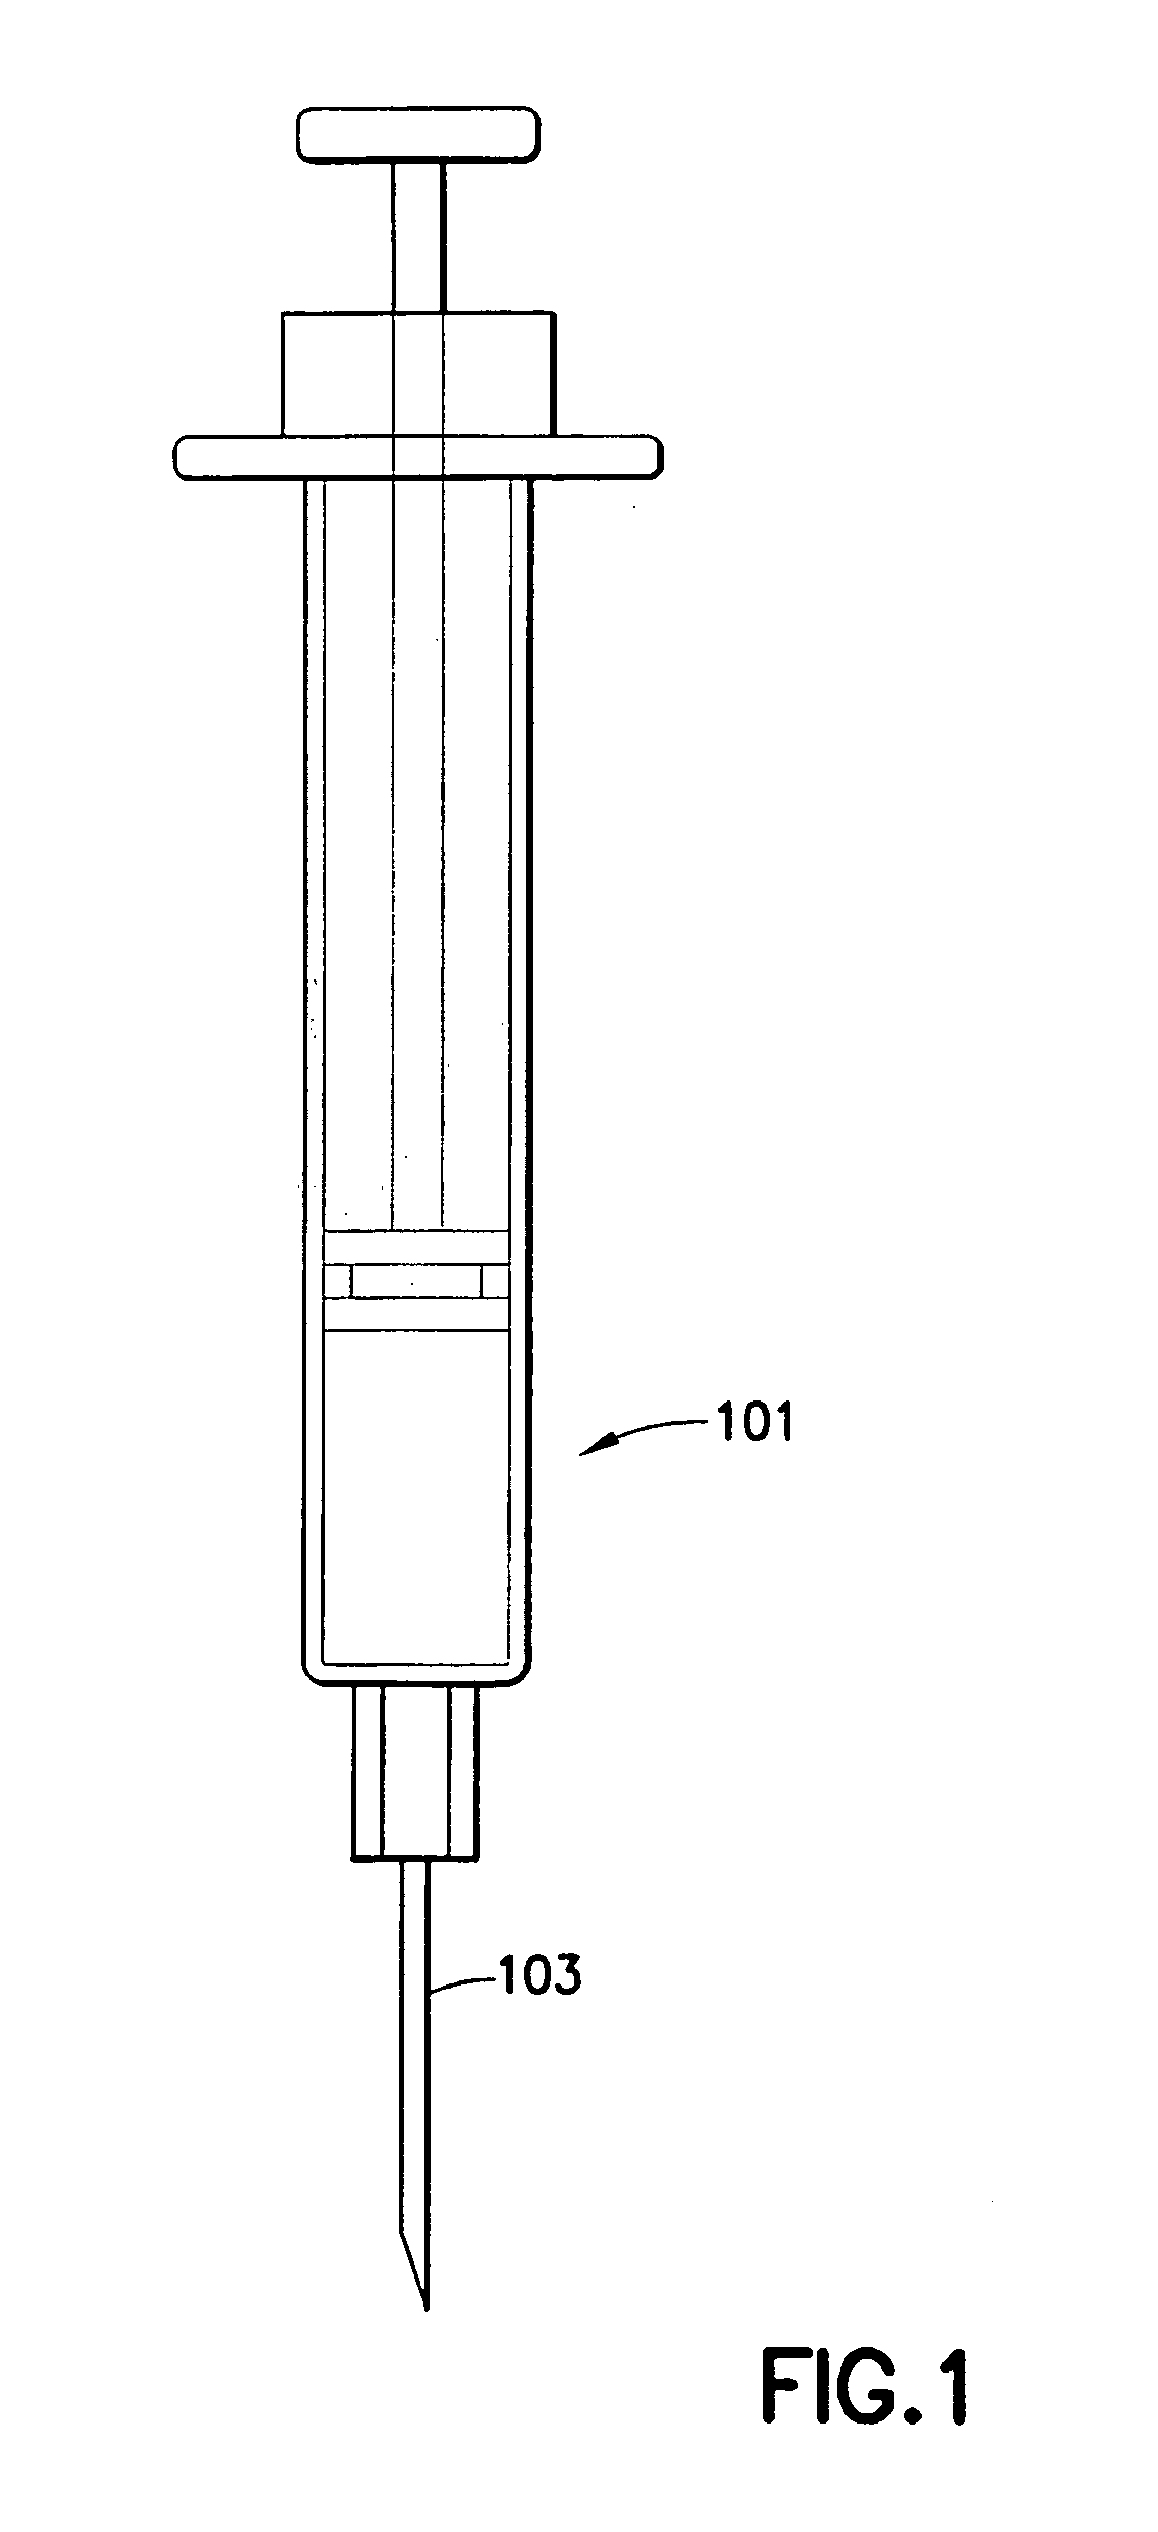 Multi-stroke delivery pumping mechanism for a drug delivery device for high pressure injections